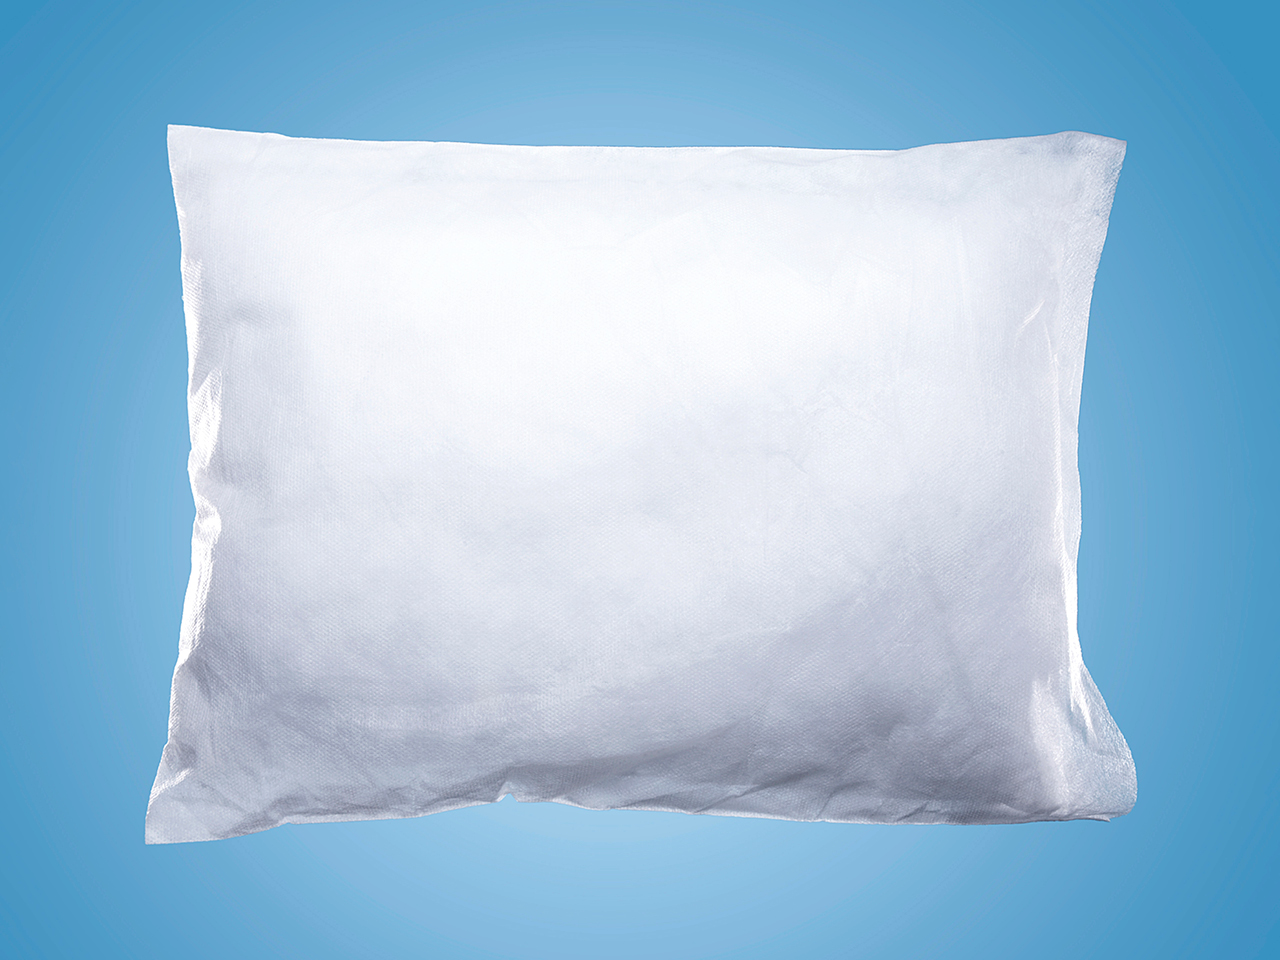 A white pillow on a blue background